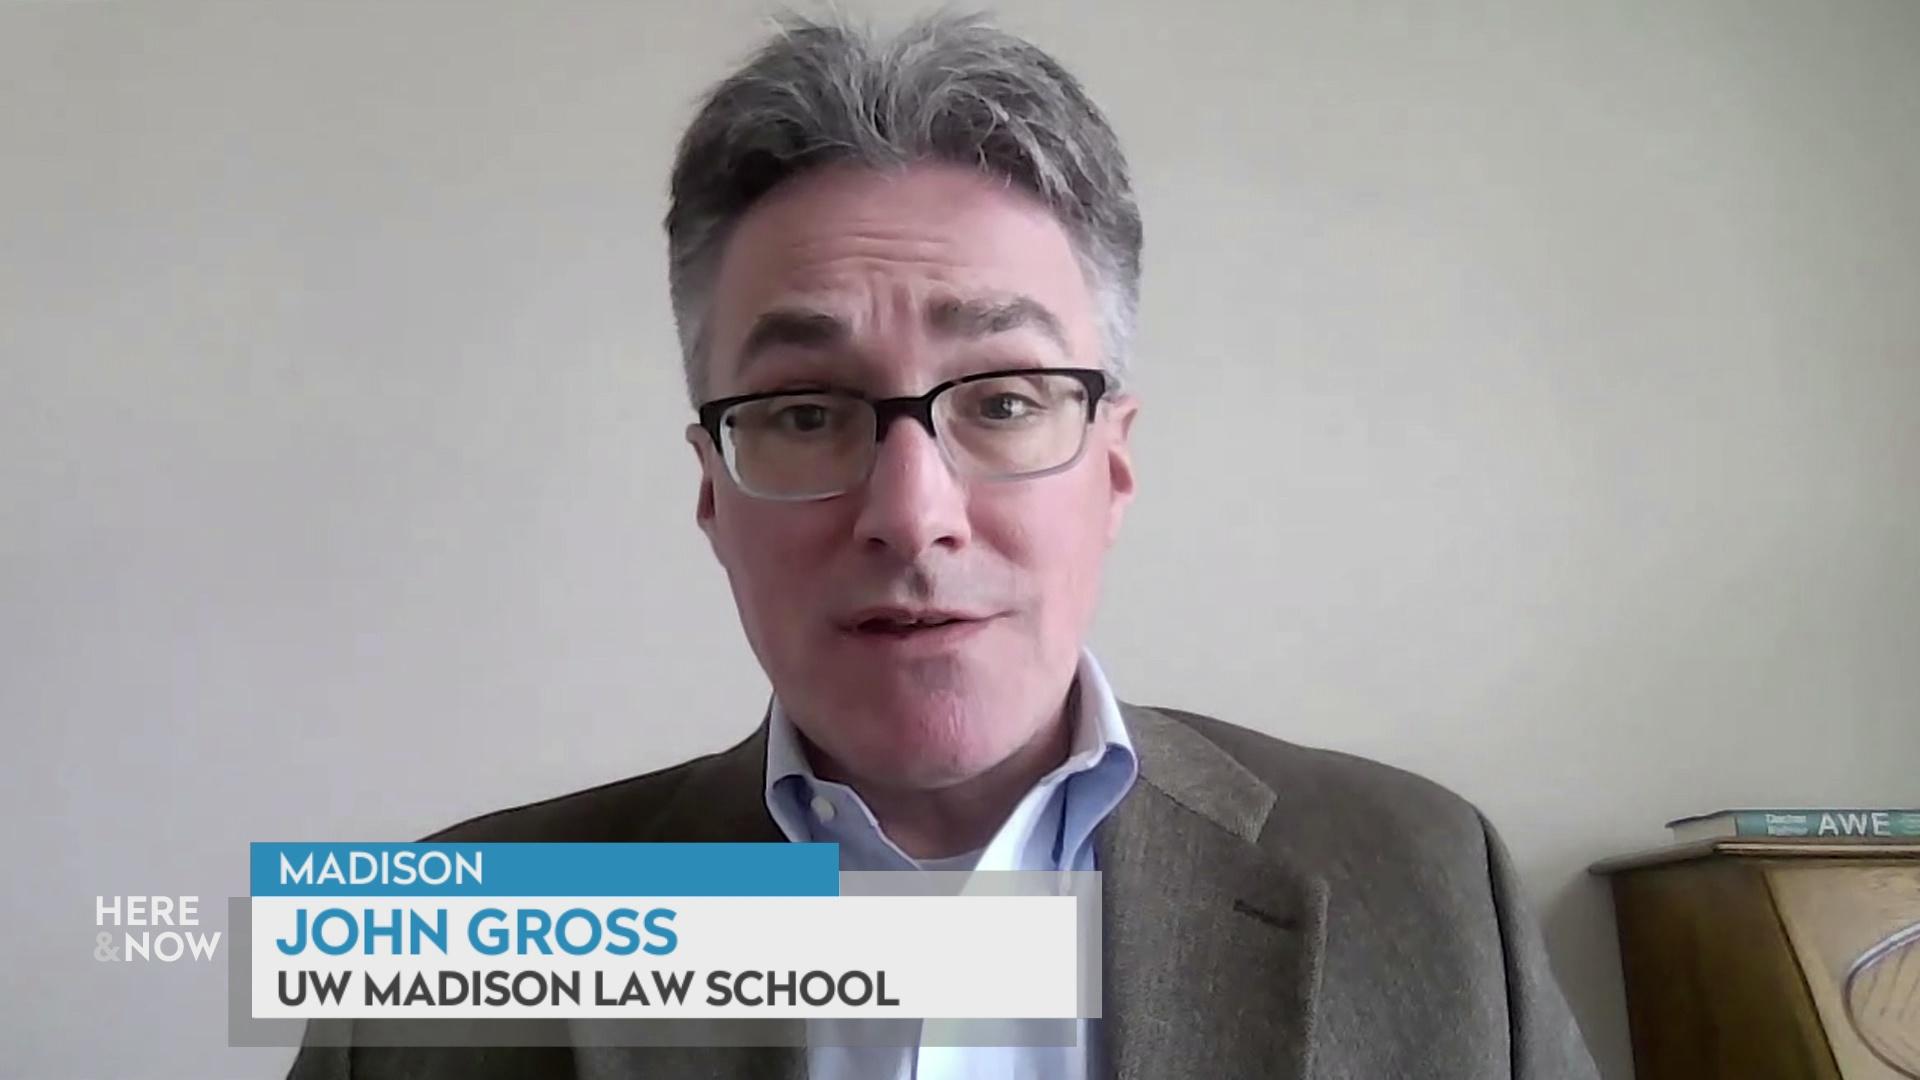 A still image from a video shows John Gross sitting with a graphic at bottom reading Madison,' 'John Gross' and 'UW Madison Law School.'